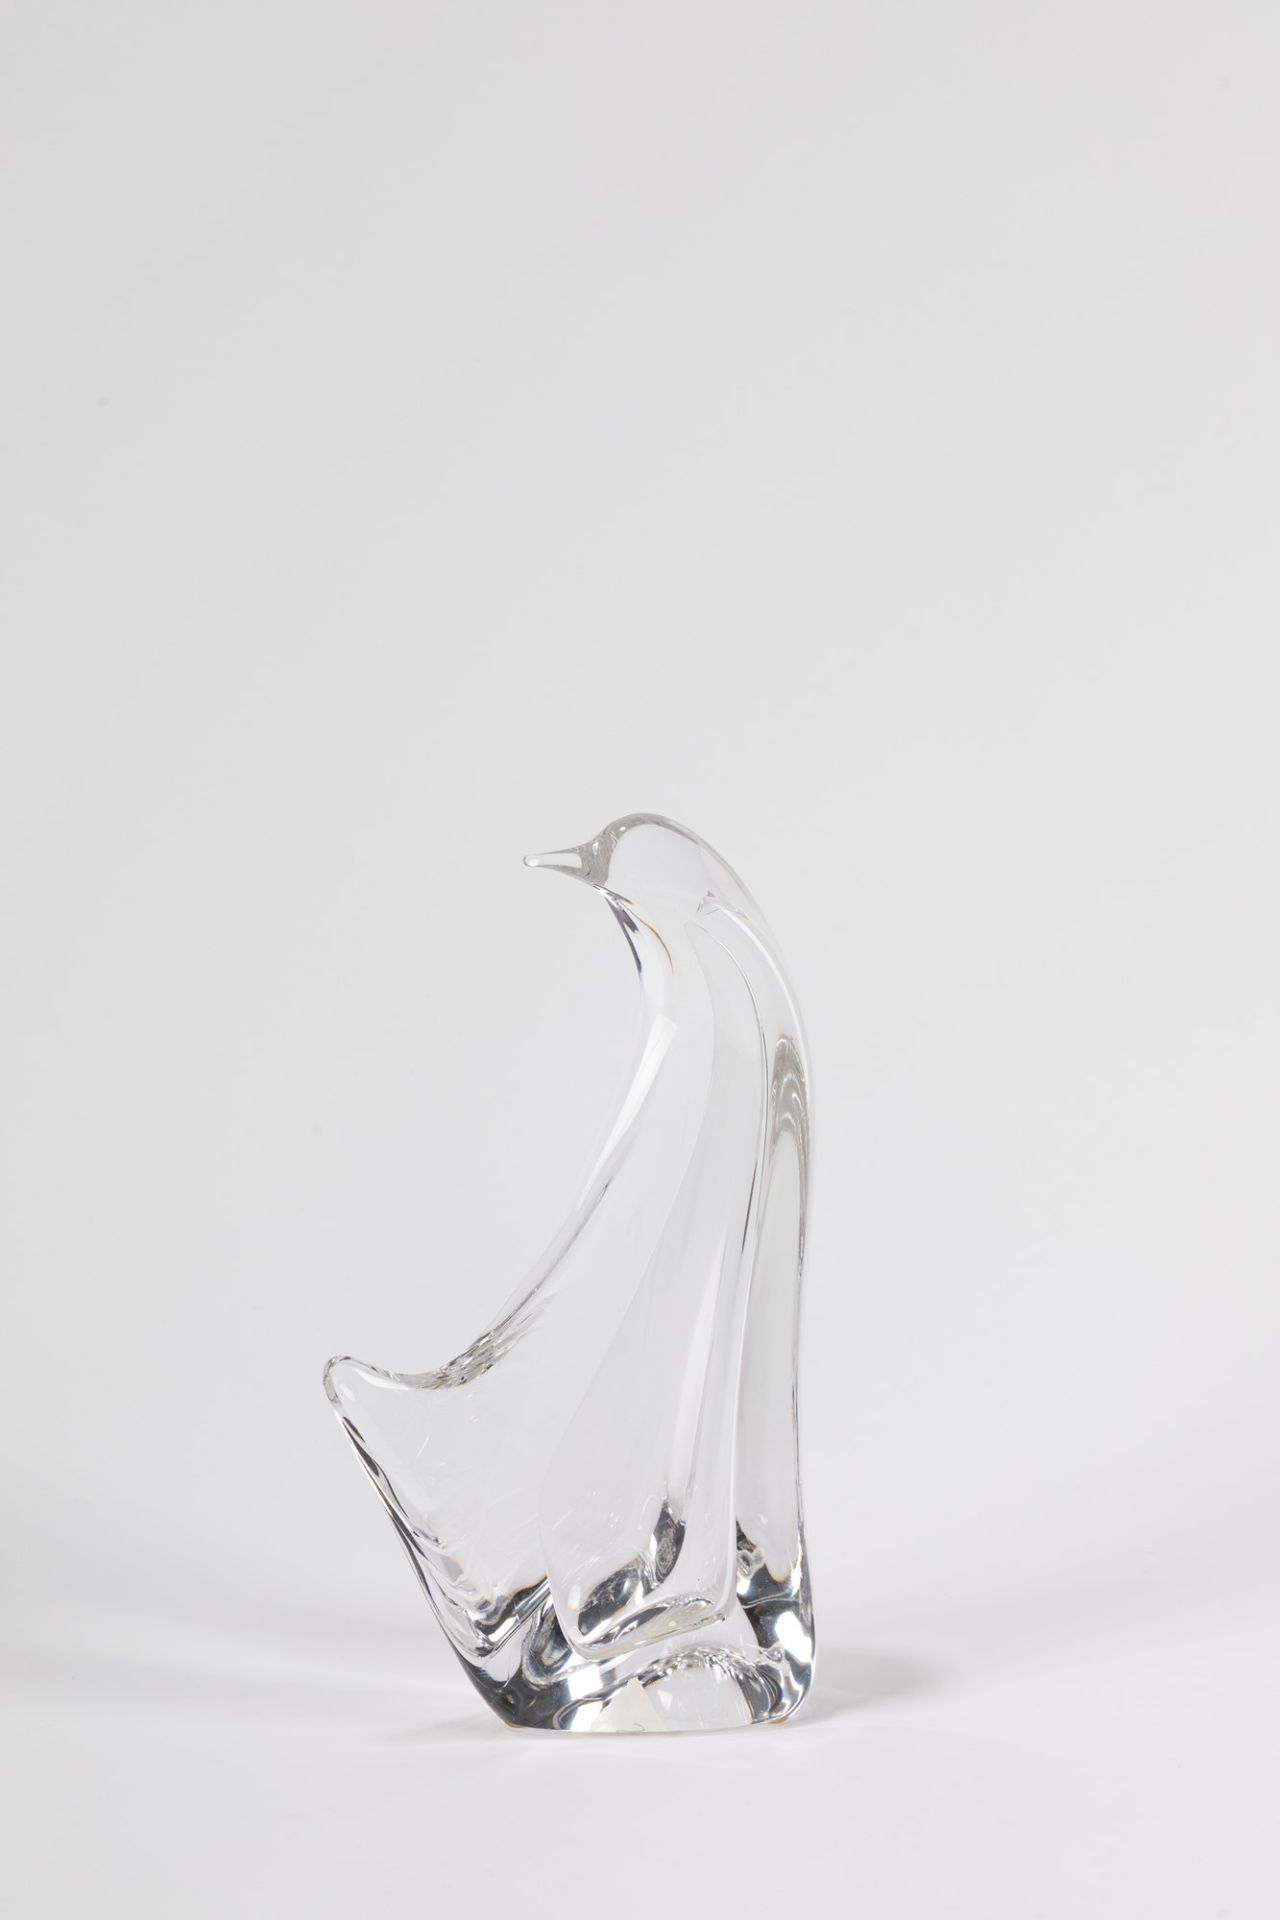 Glass sculpture depicting a dove, 20th century